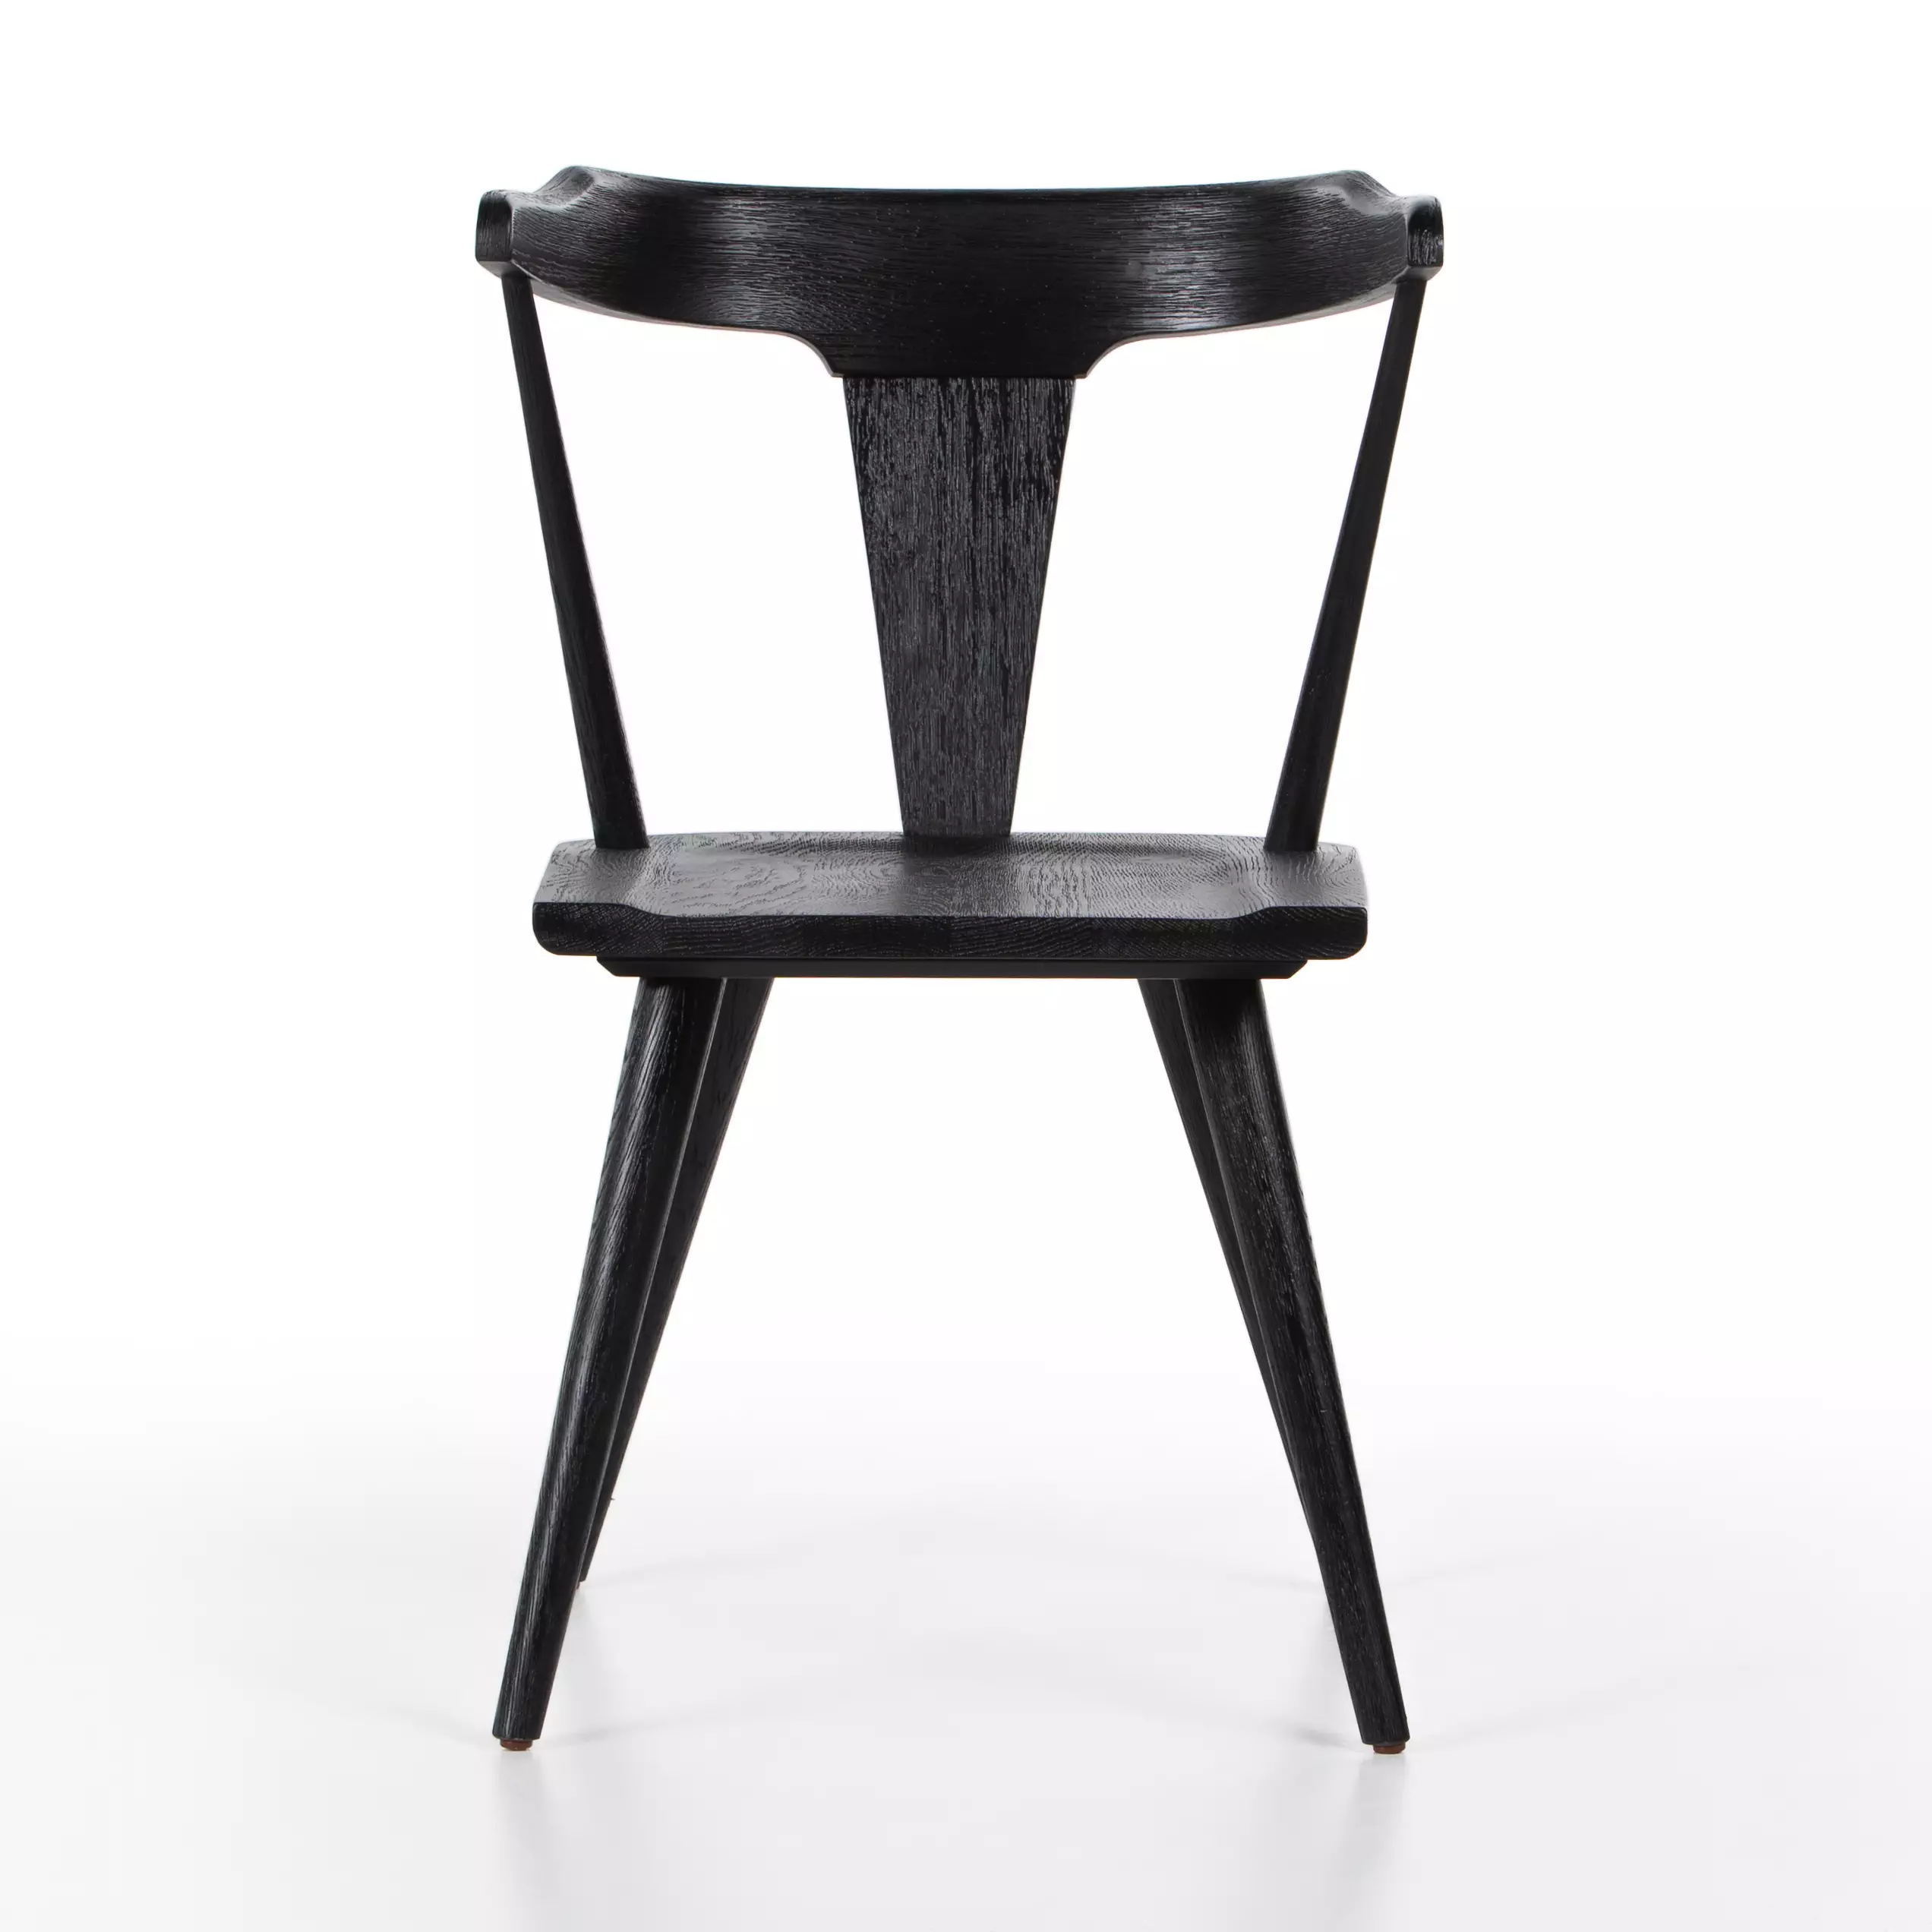 Ripley Dining Chair | Duvall & Co.